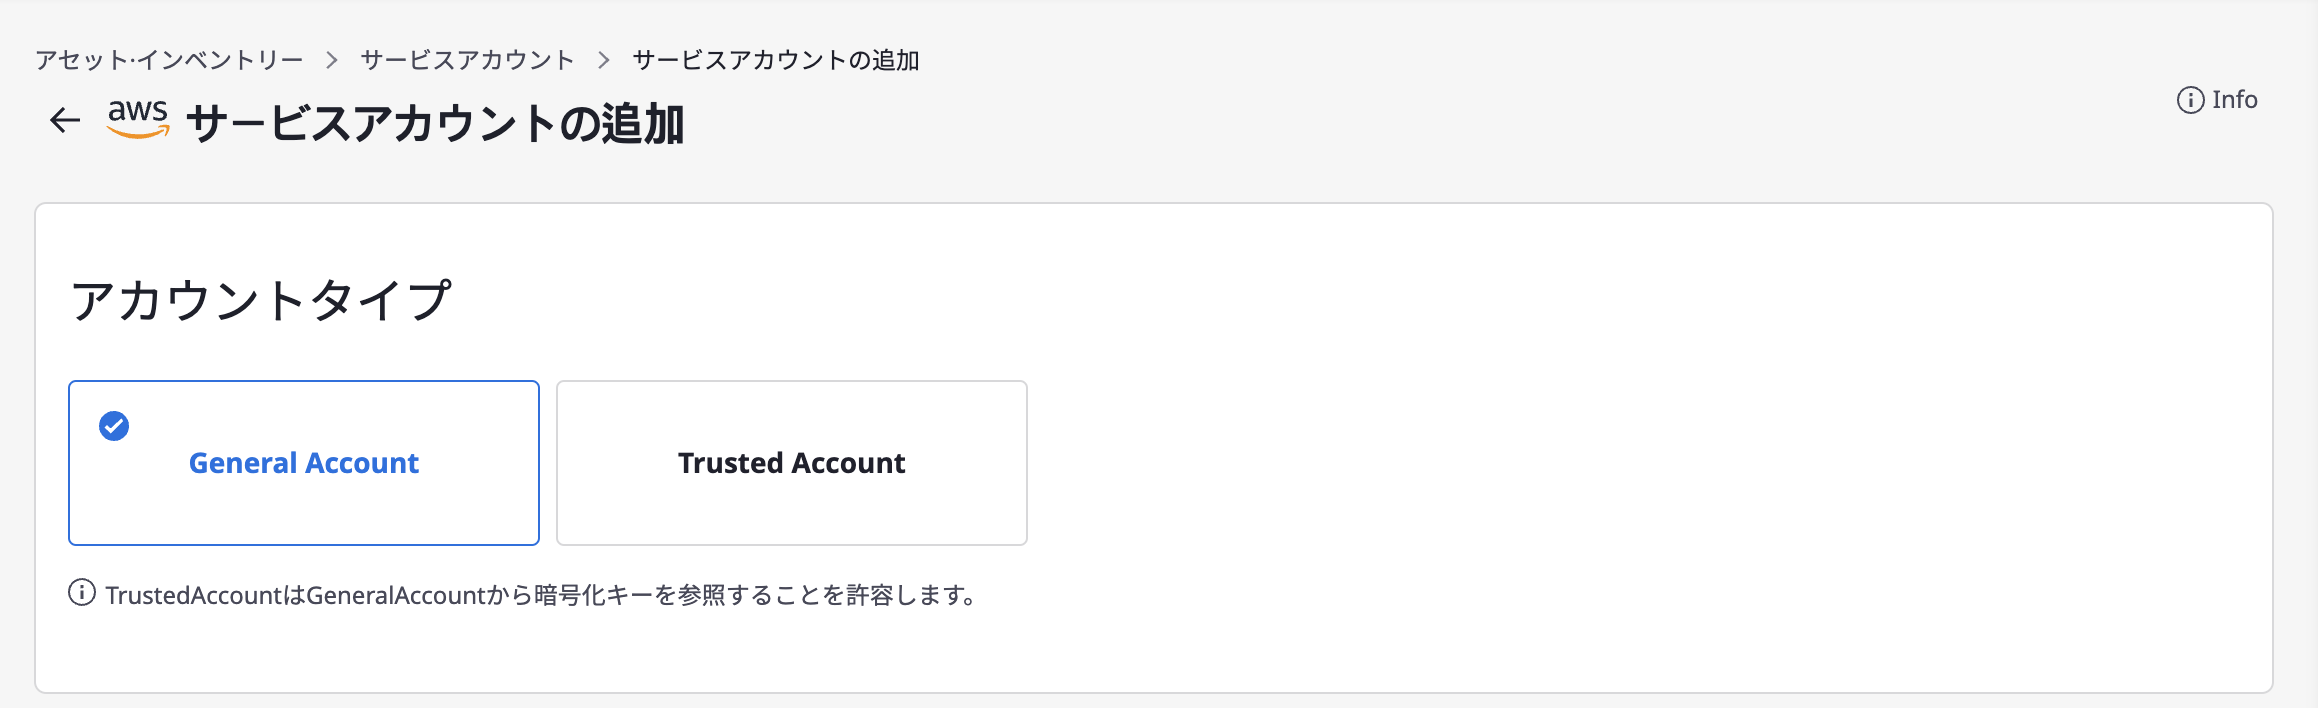 service-account-select-general-accout